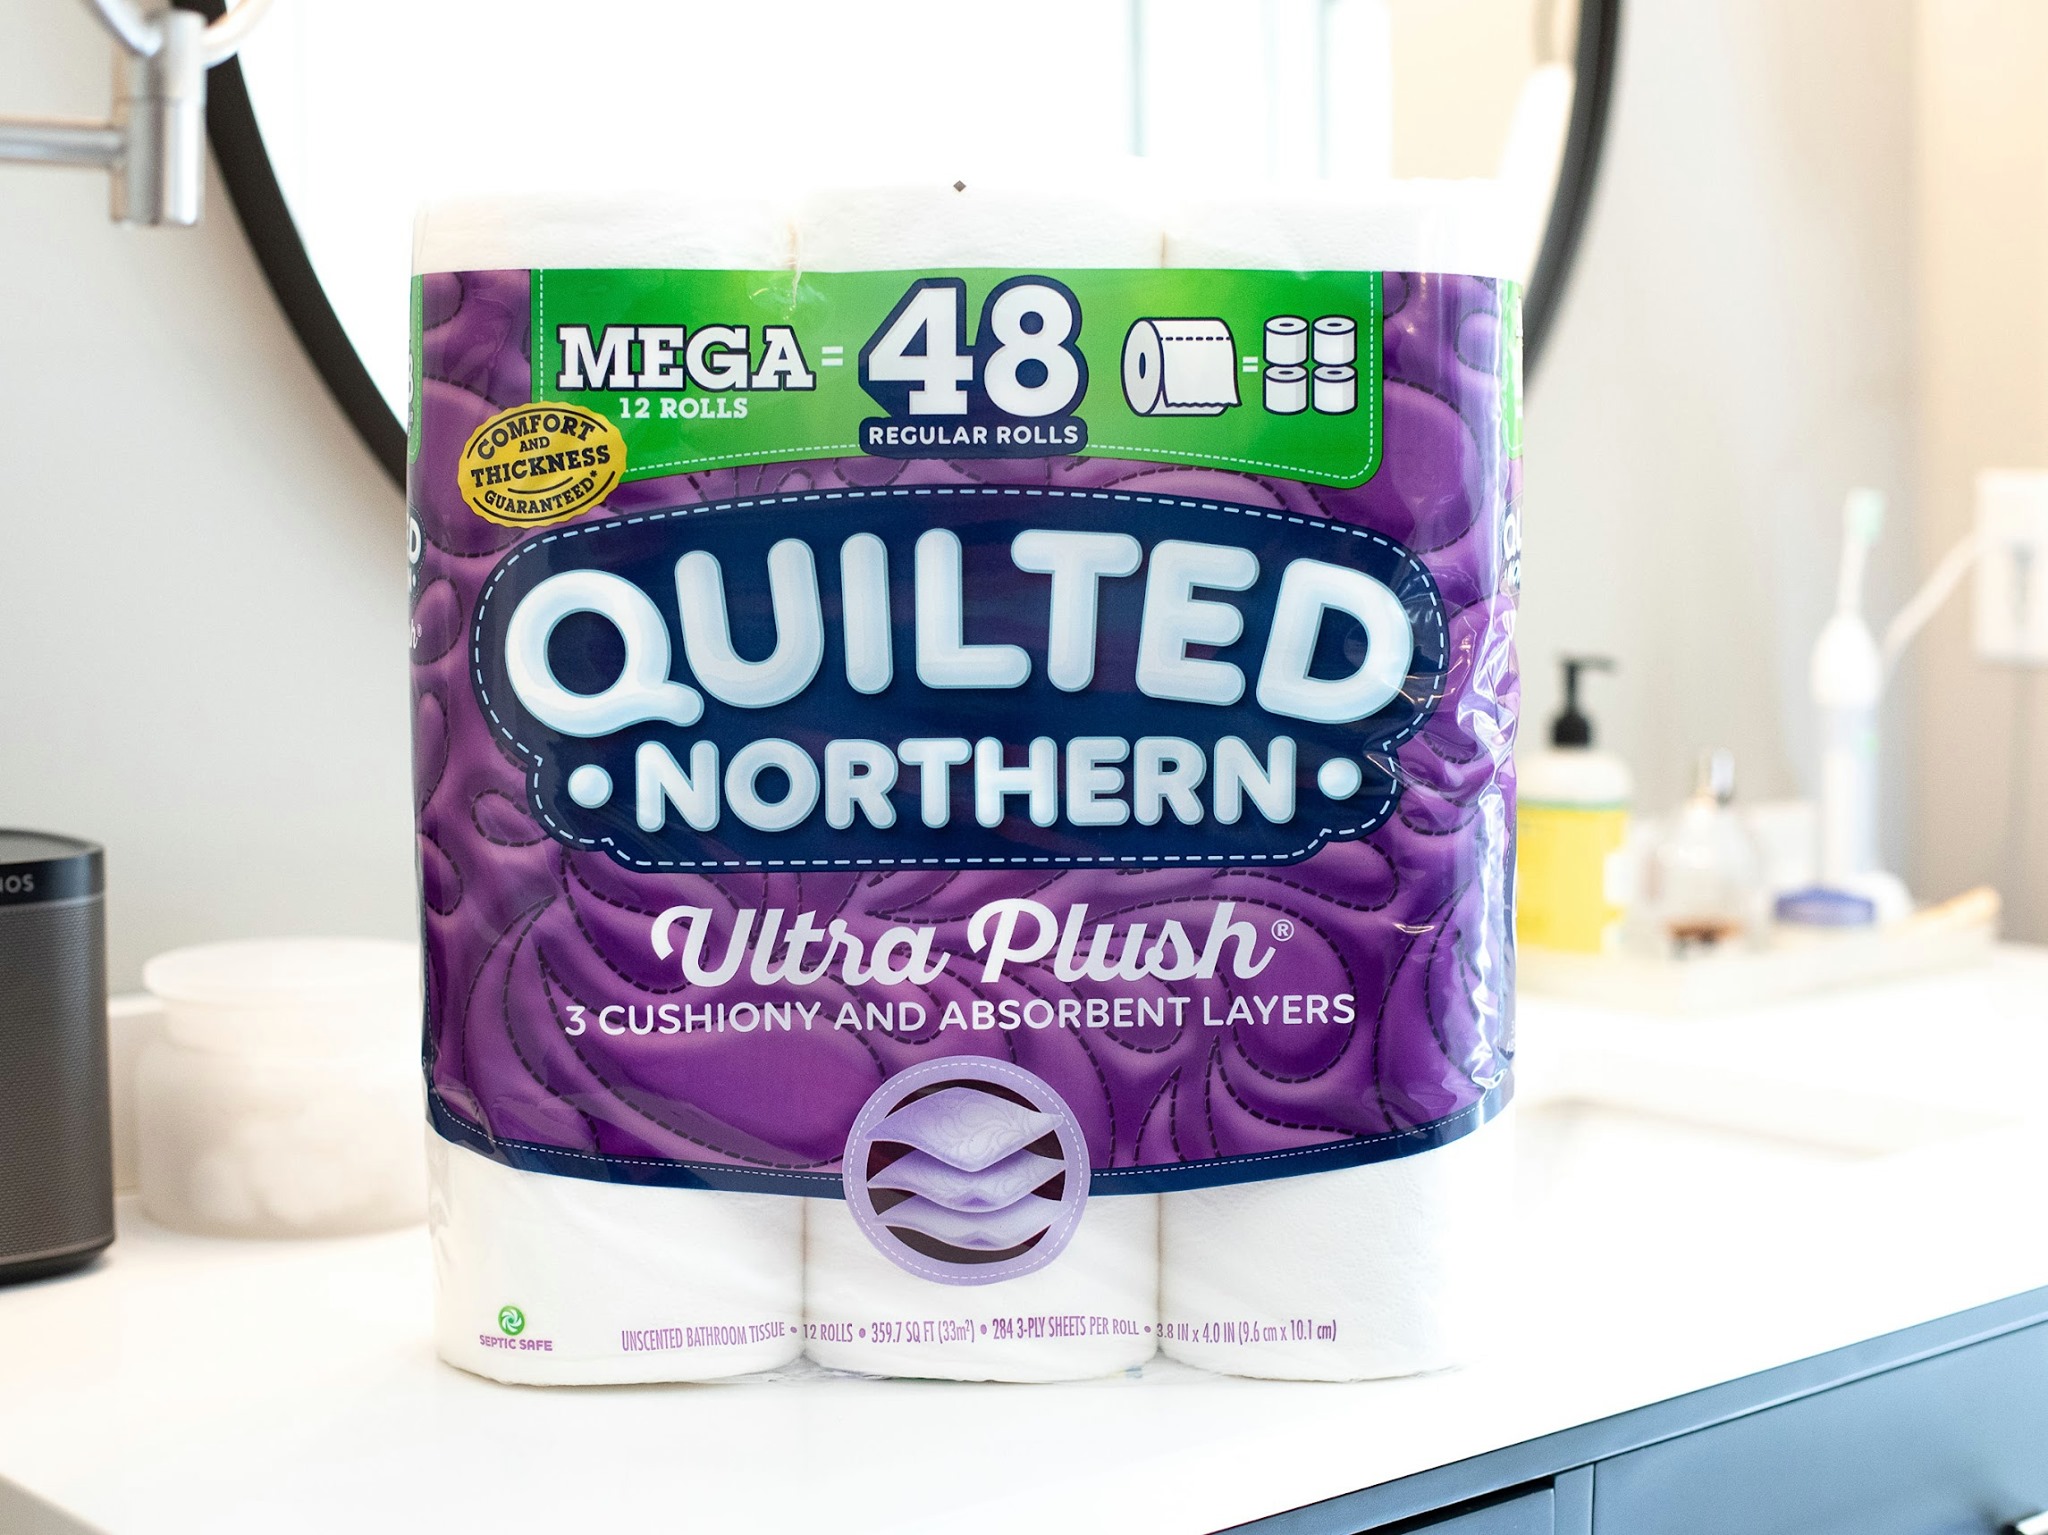 Mega Roll Packages Of Quilted Northern Toilet Paper As Low As $9.99 At Kroger